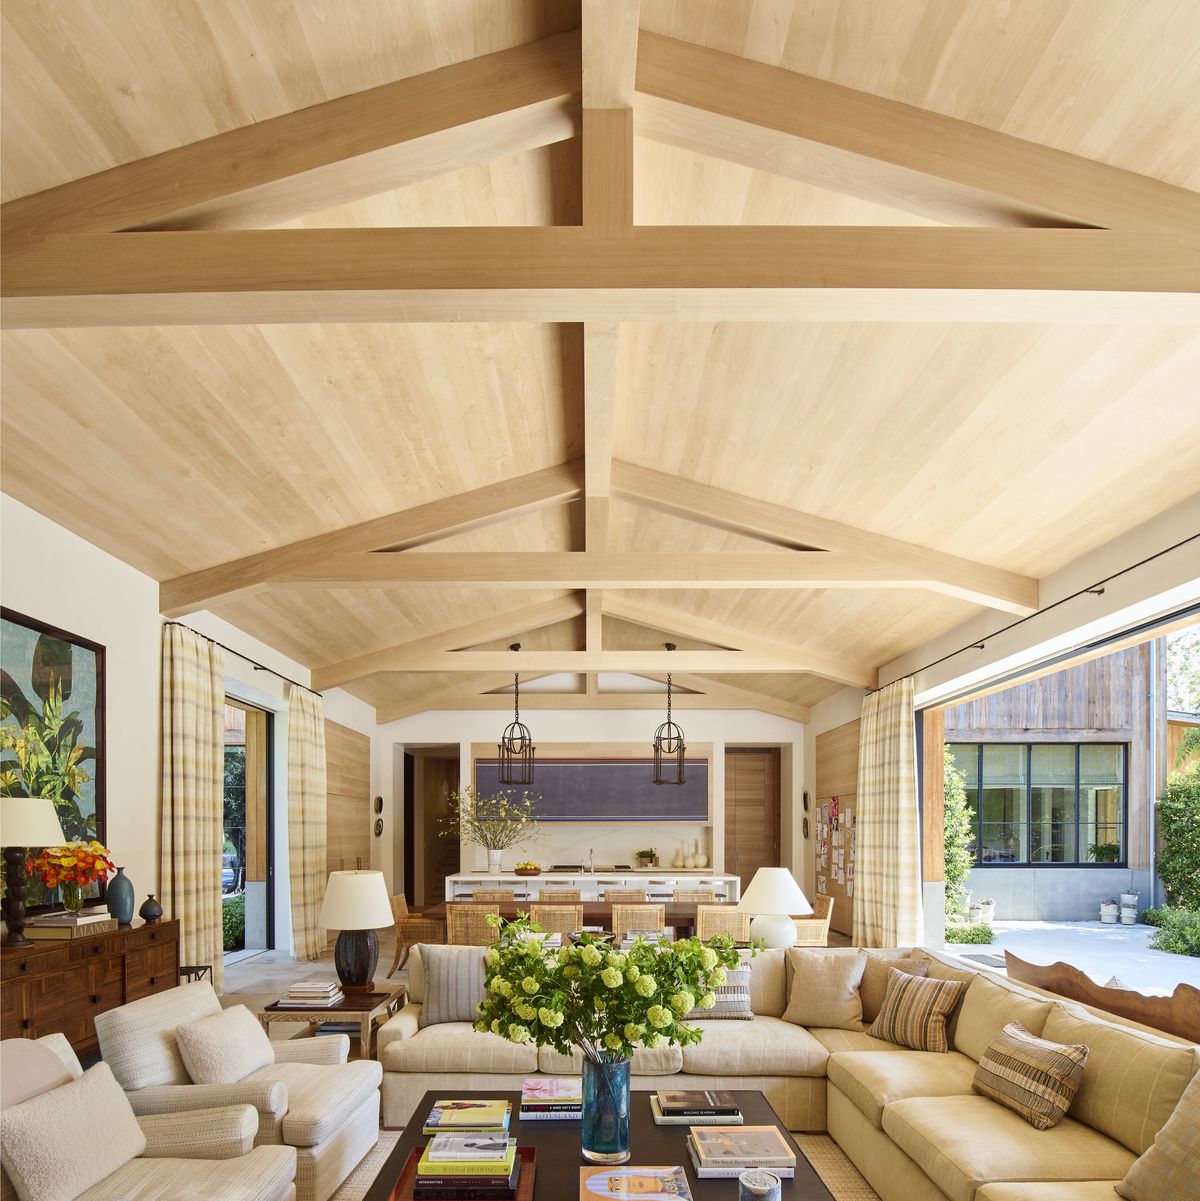 los angeles california home designed by michael s smith great room